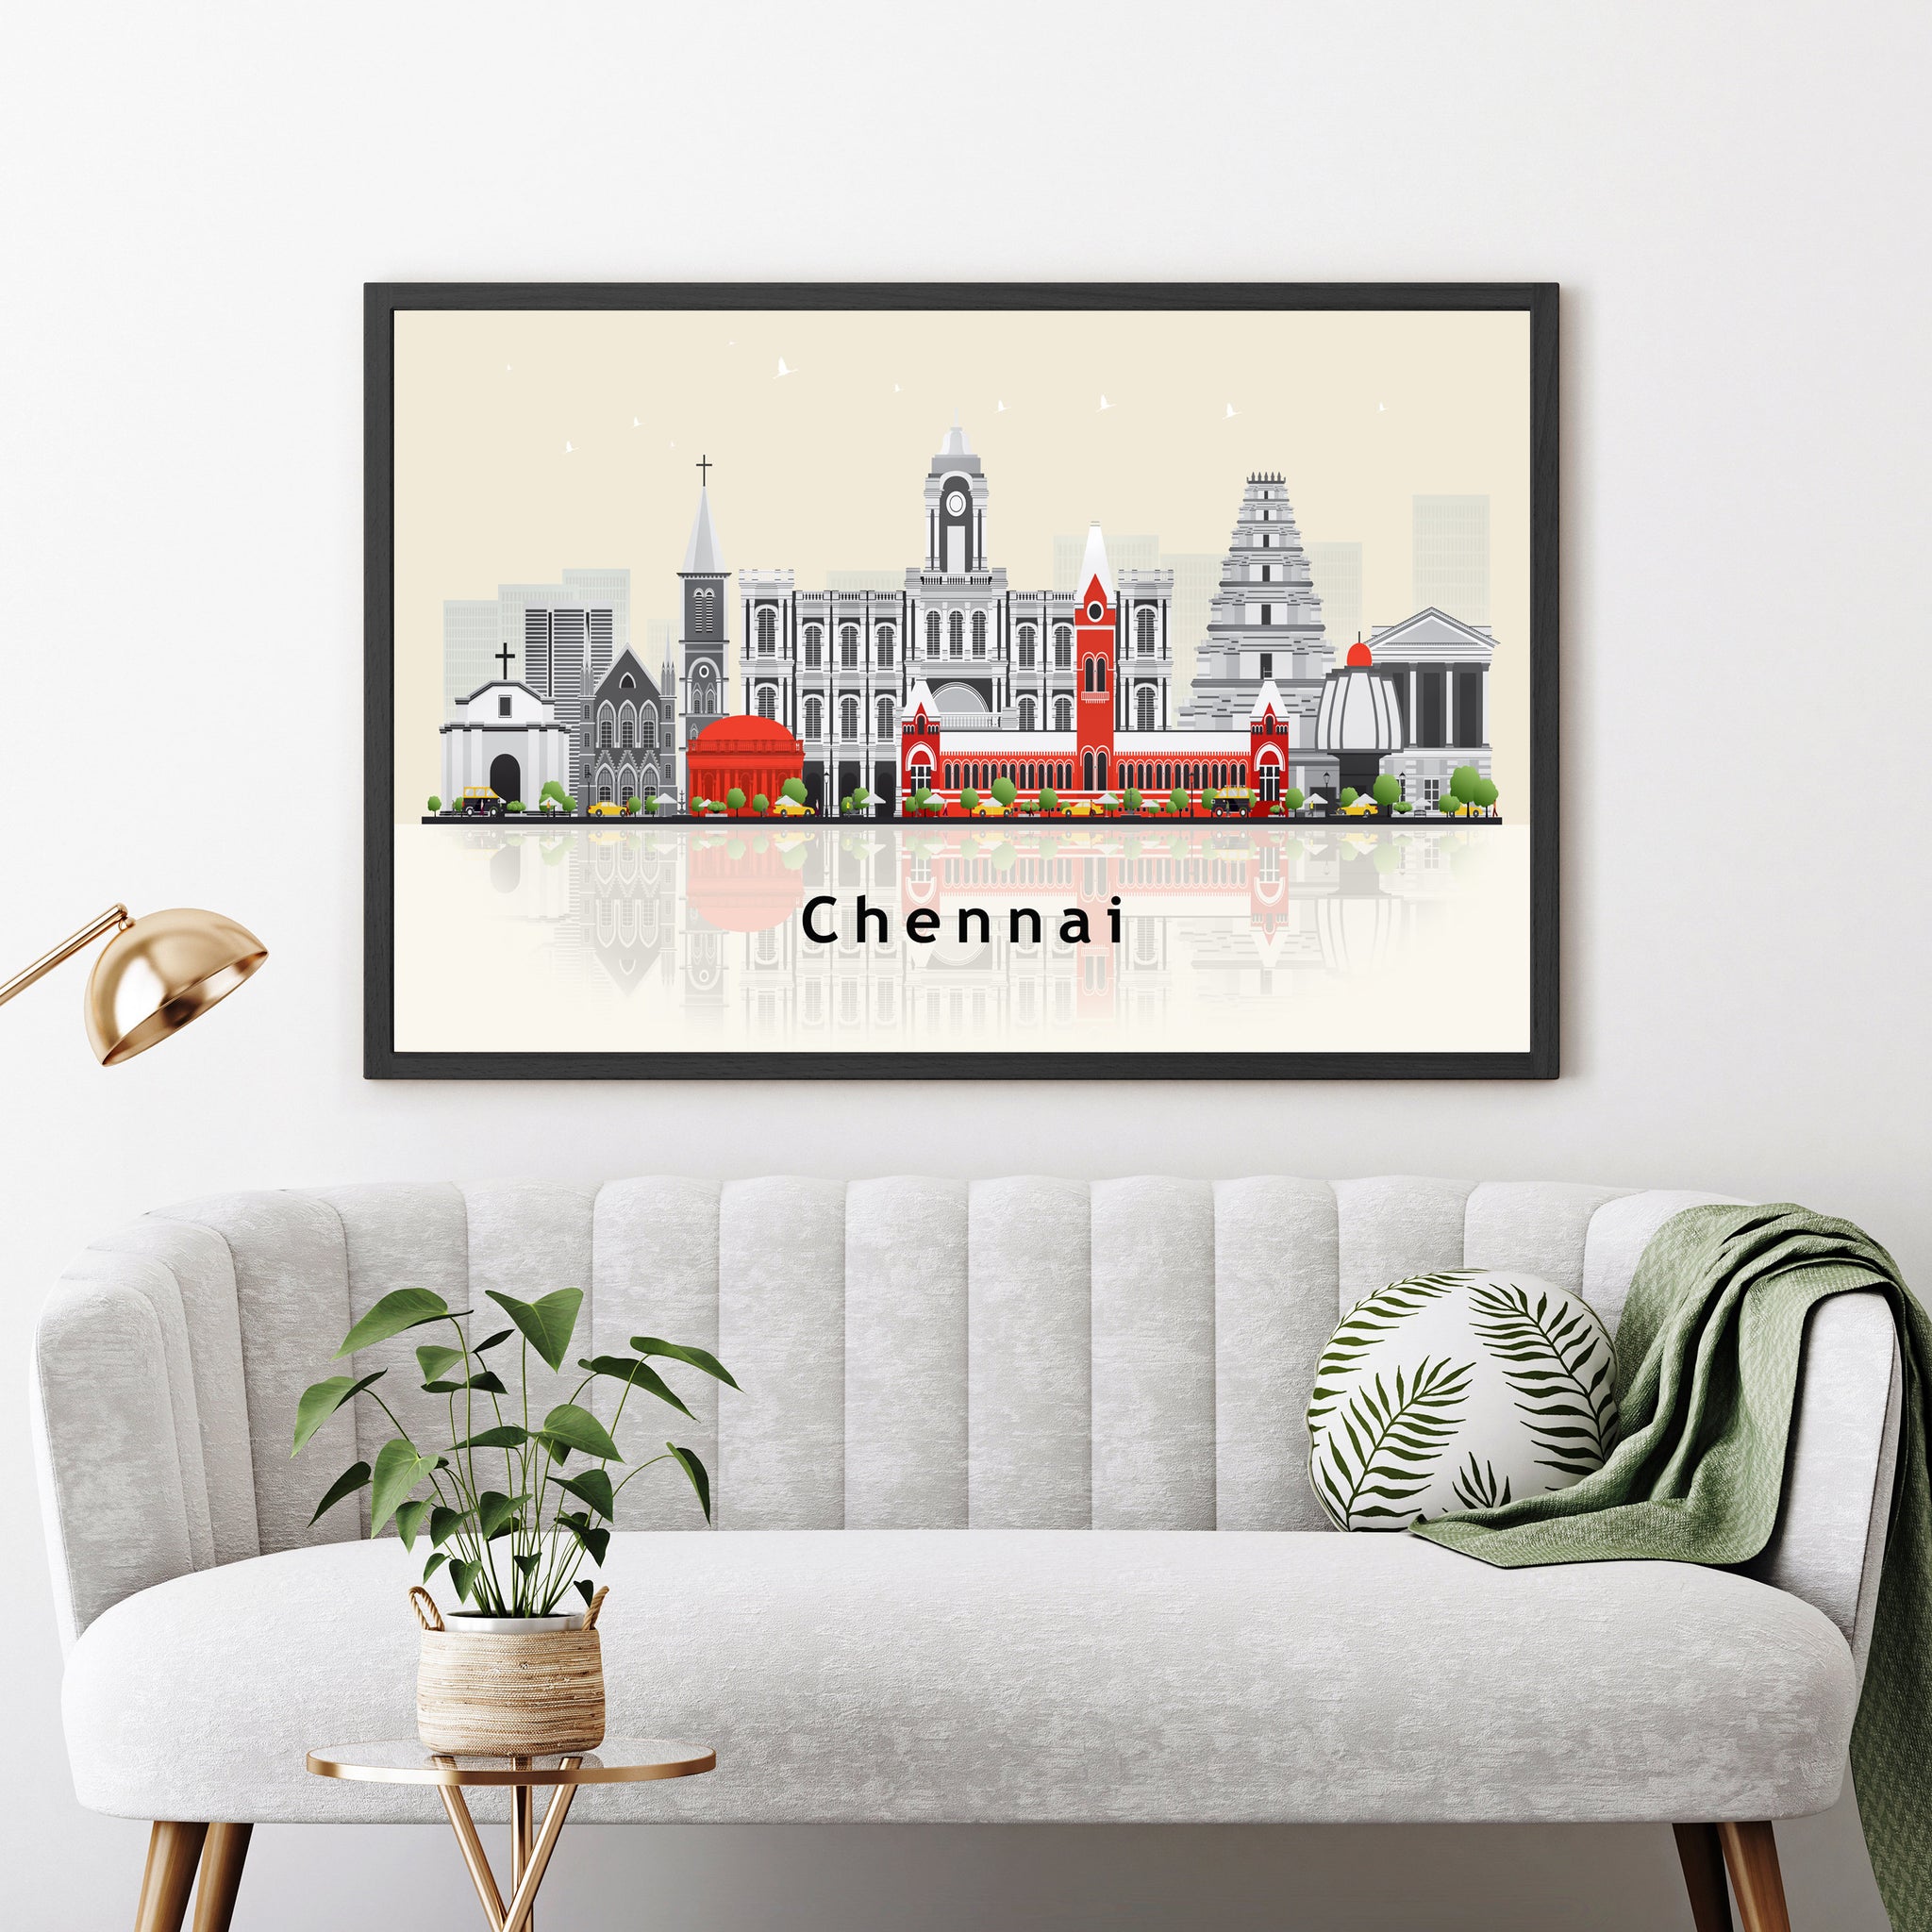 CHENNAI INDIA Illustration skyline poster, Modern skyline cityscape poster, India city skyline landmark map poster, Home wall decoration